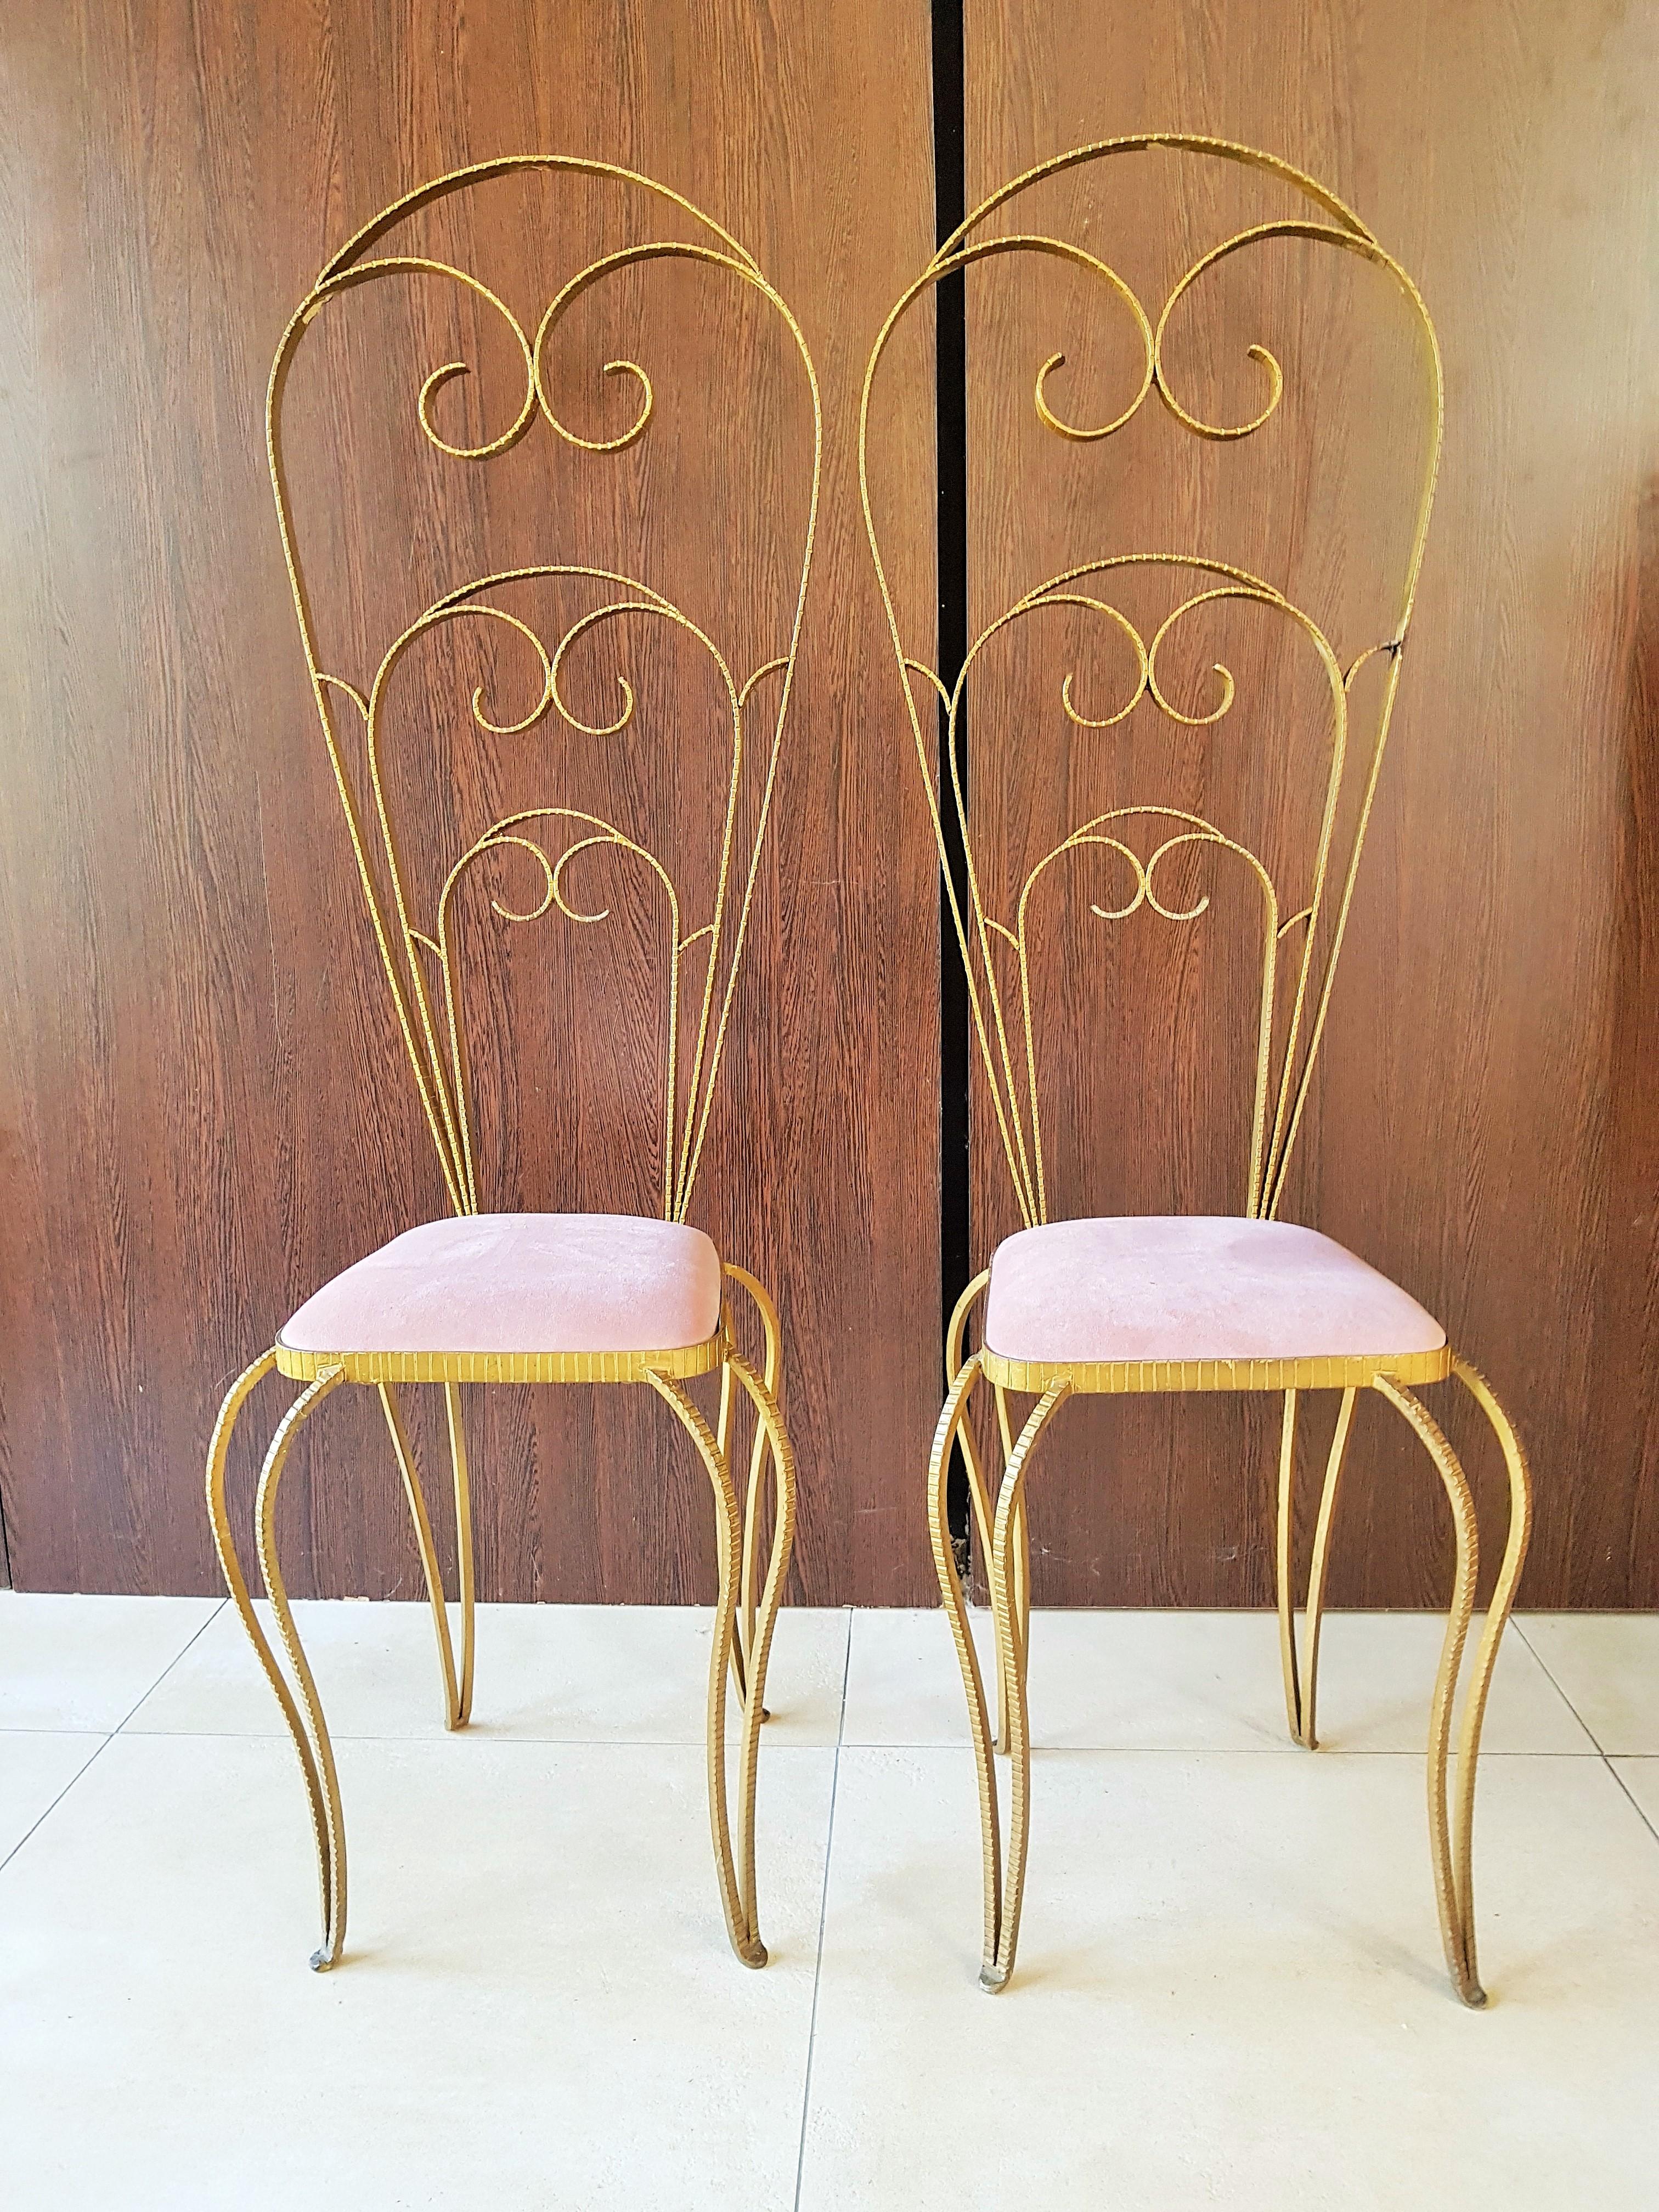 Art Deco midcentury pair of chairs wrought iron by Pier Luigi Colli, Italy, 1940s. Iron, gold color patina. New upholstered with old-pink suede.

High backrests, entirely hand-molded, as if they were sculptures, amazing work of great